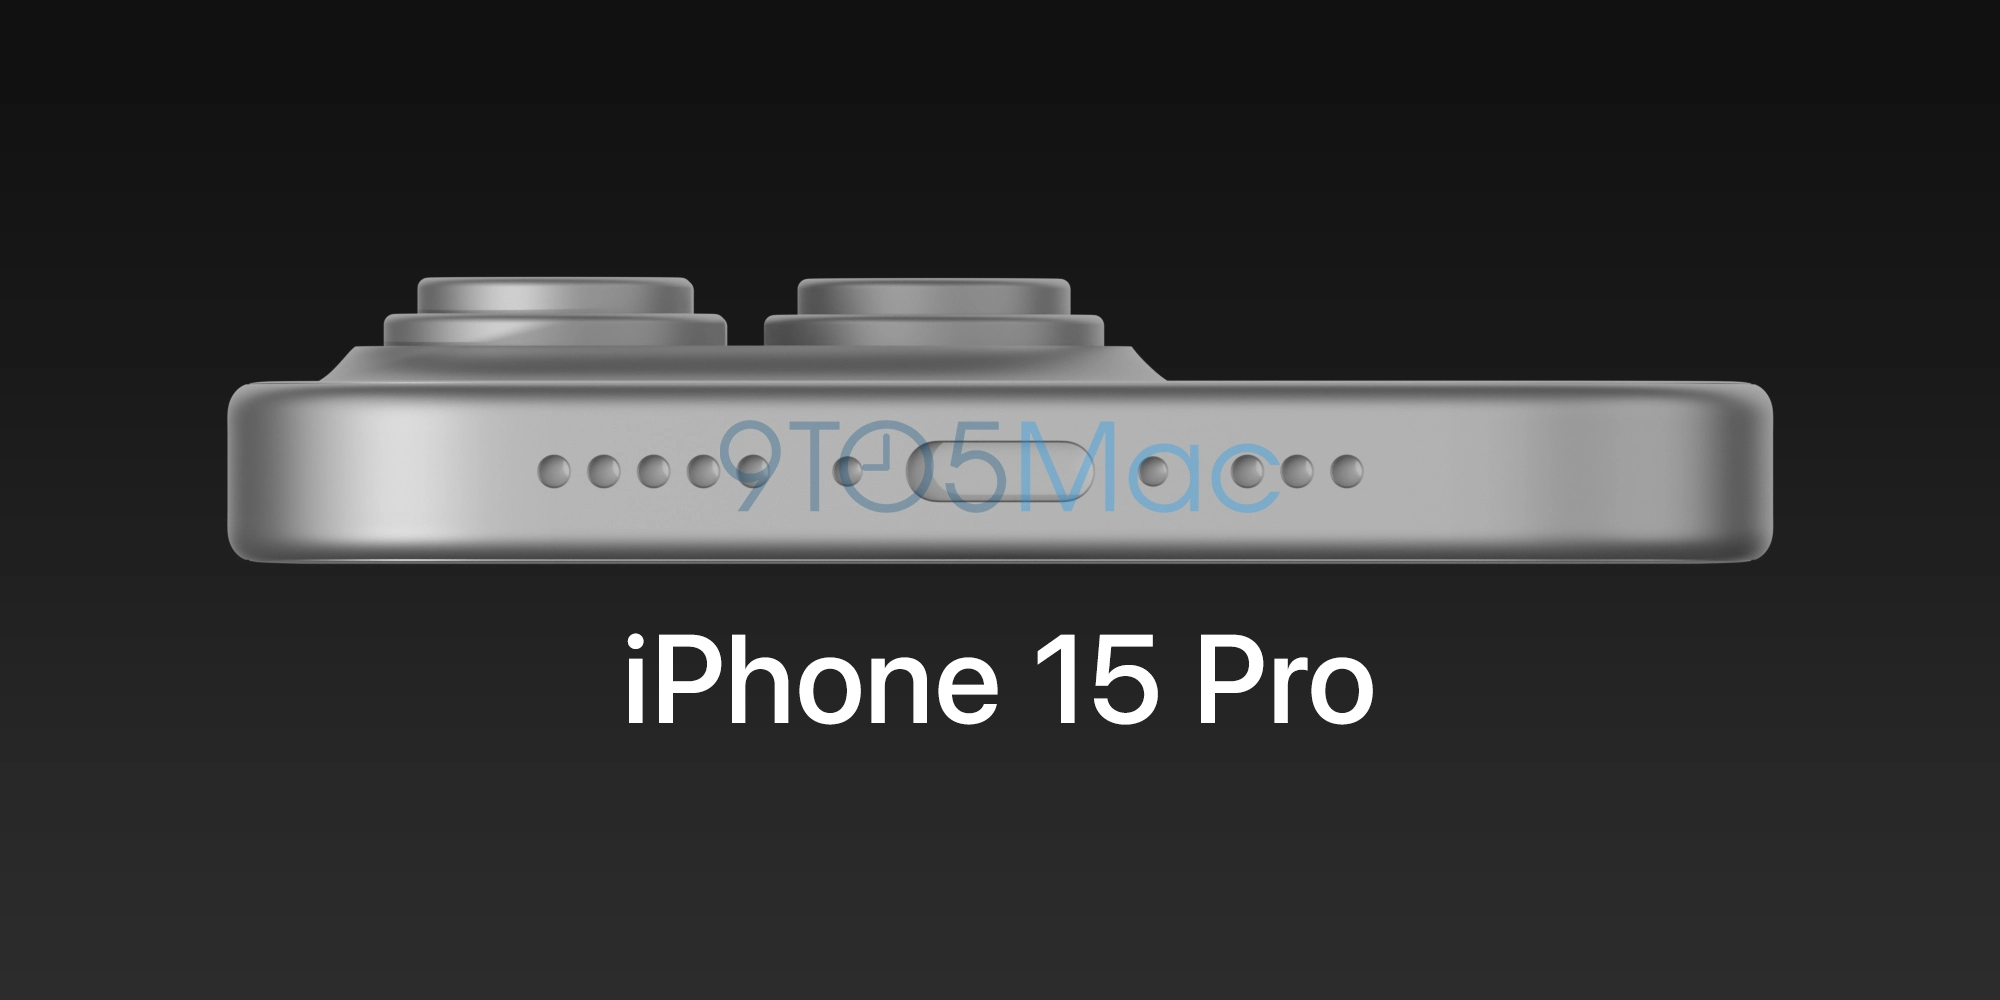 iphone-15-pro-cad-fi-1_large.png (275 KB)